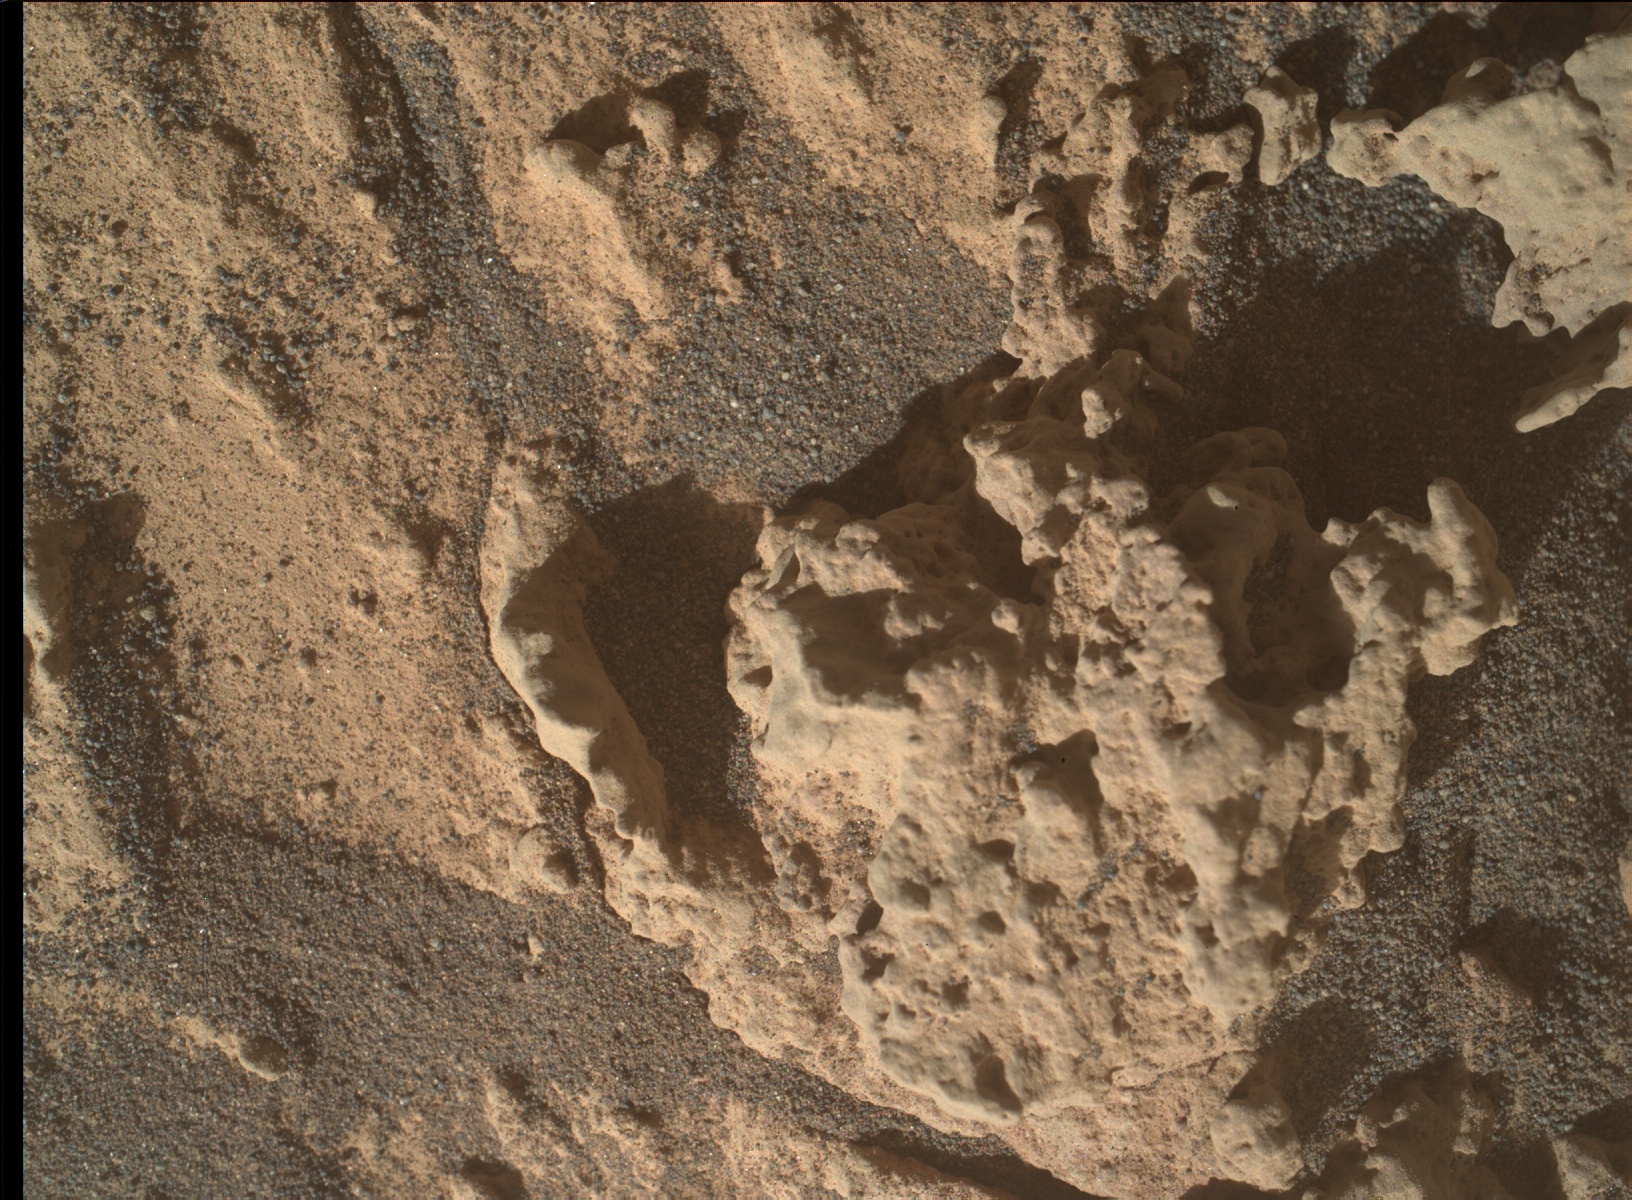 Nasa's Mars rover Curiosity acquired this image using its Mars Hand Lens Imager (MAHLI) on Sol 3180